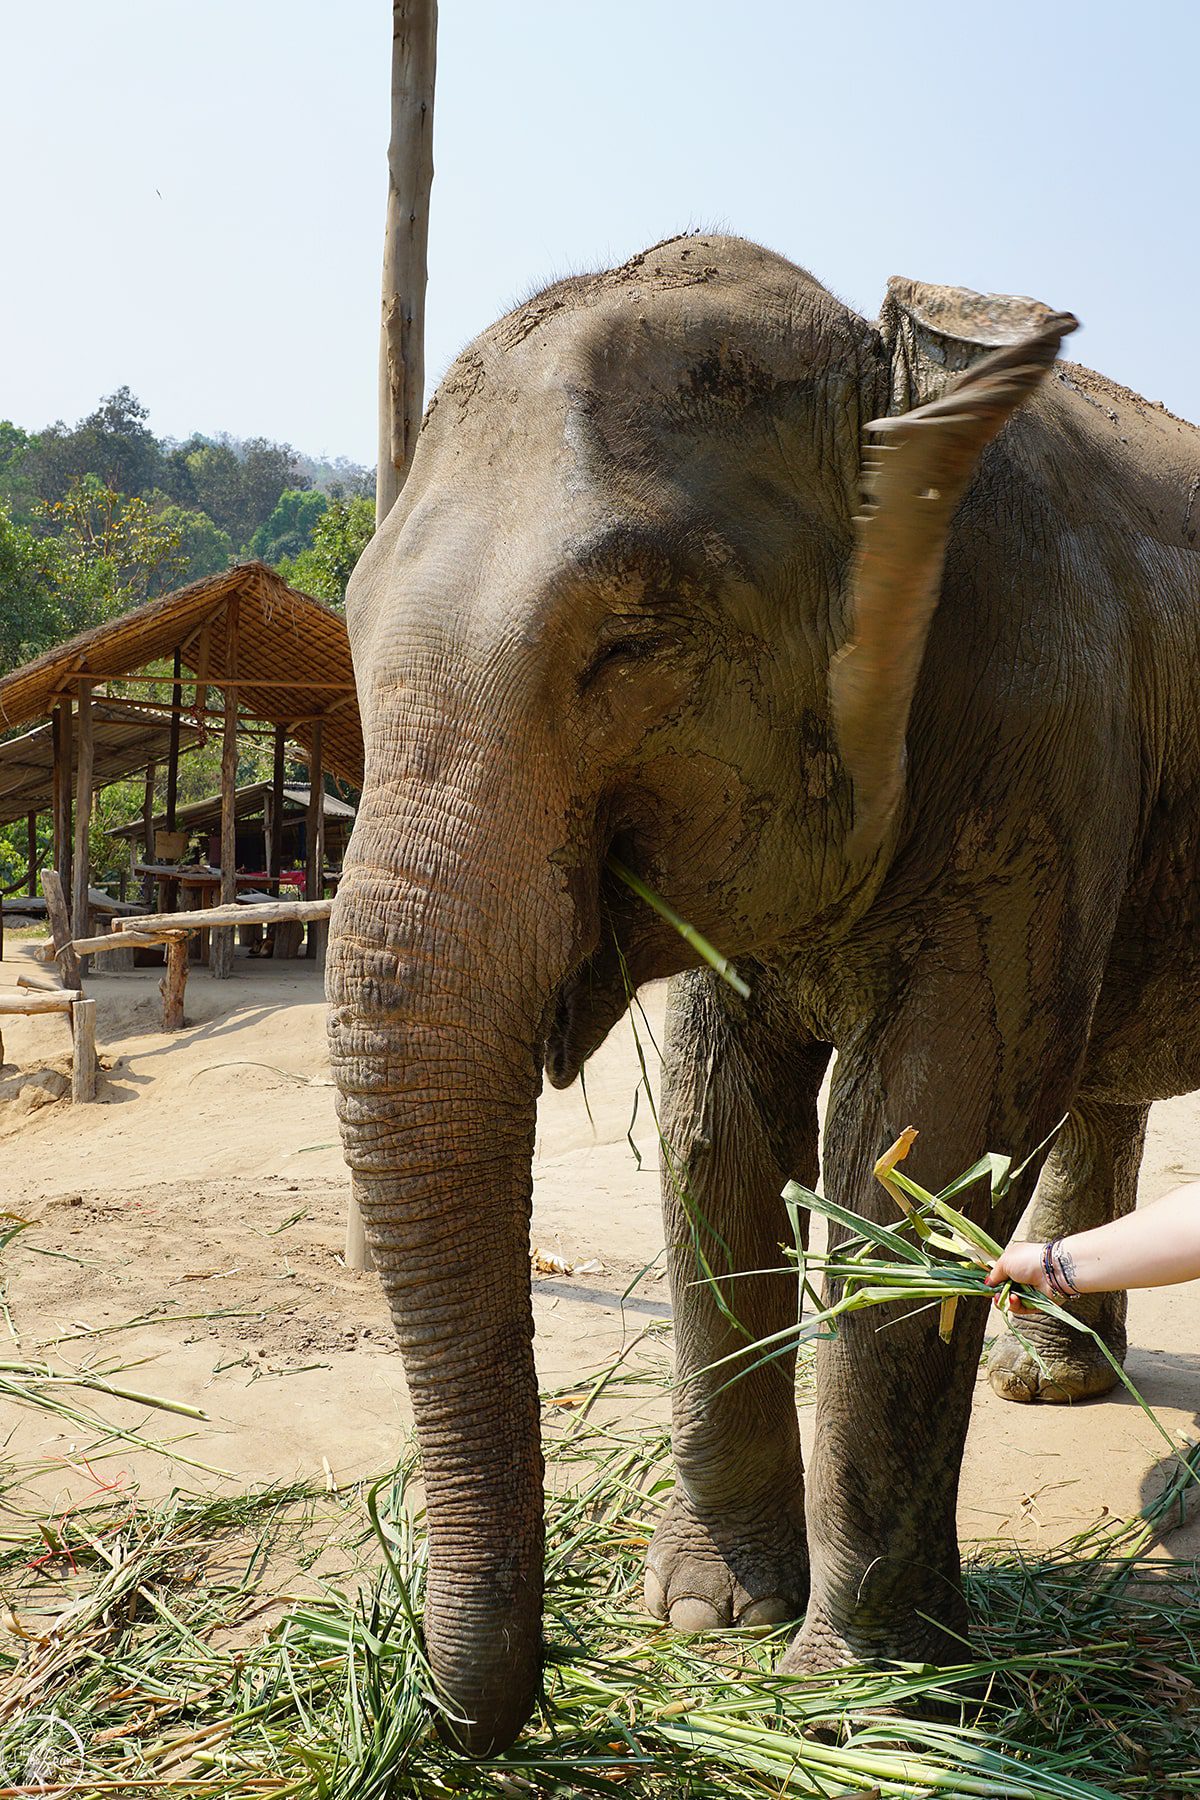 Visiting an Elephant Sanctuary in Chiang Mai